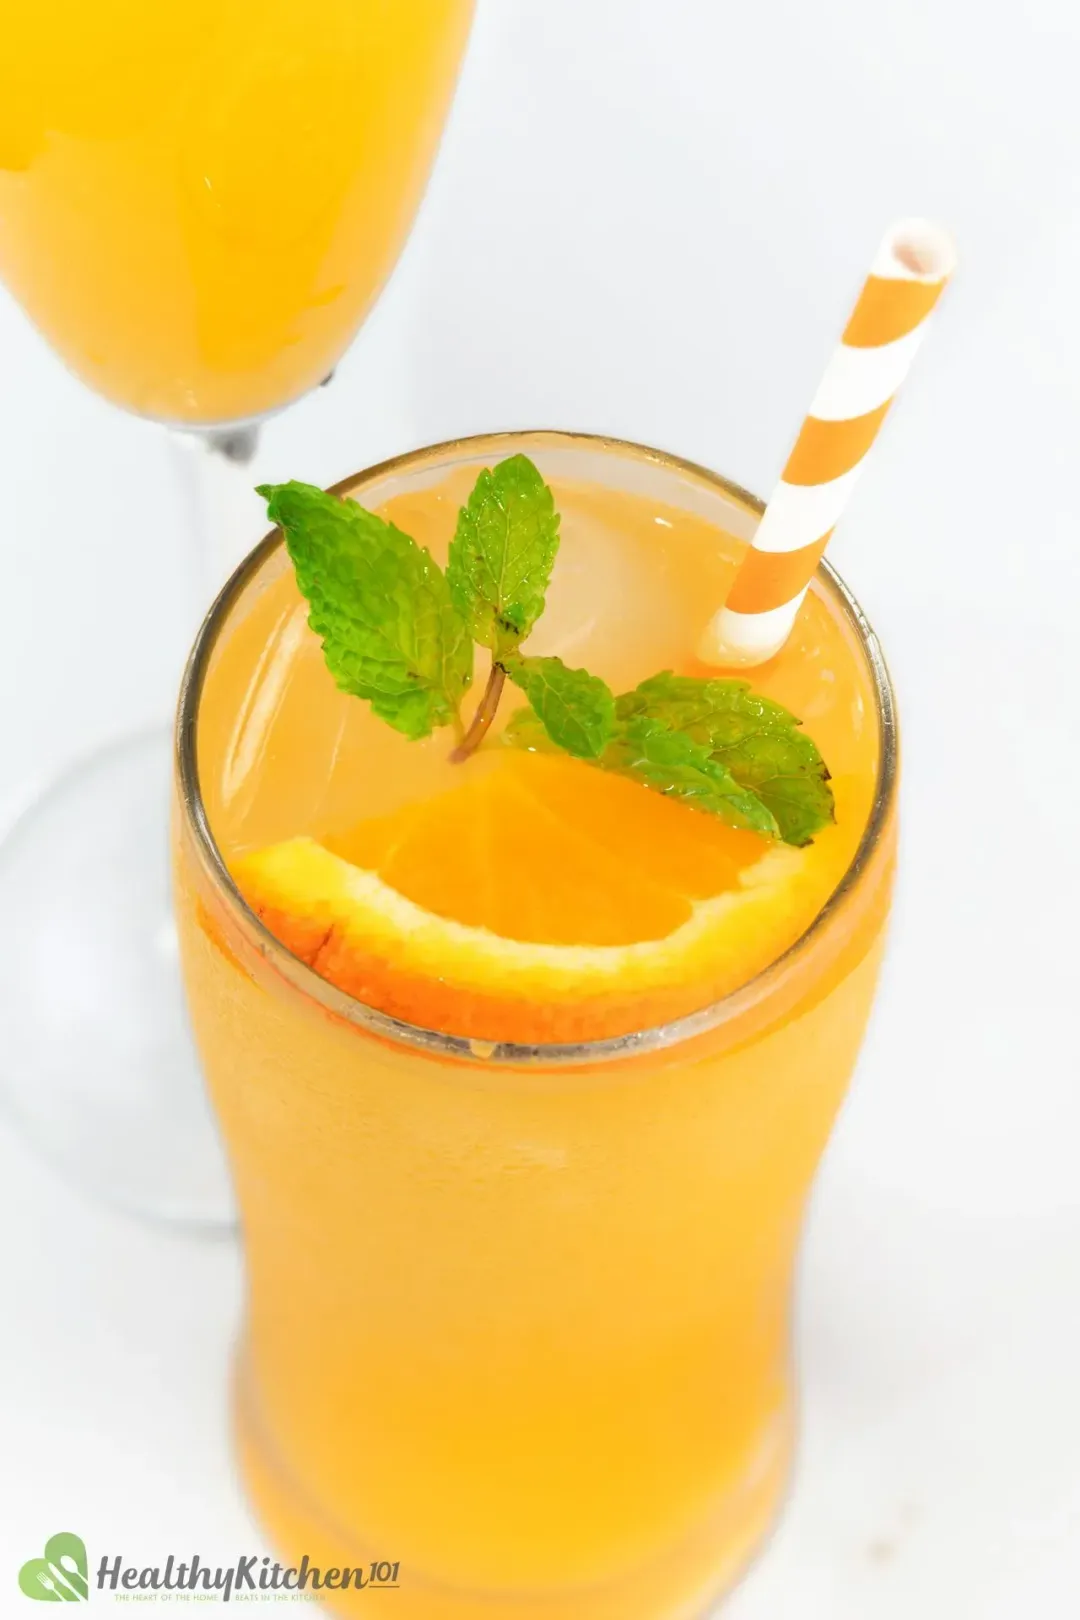 A Healthy Ginger Ale and Orange Juice Recipe to Freshen Your Day